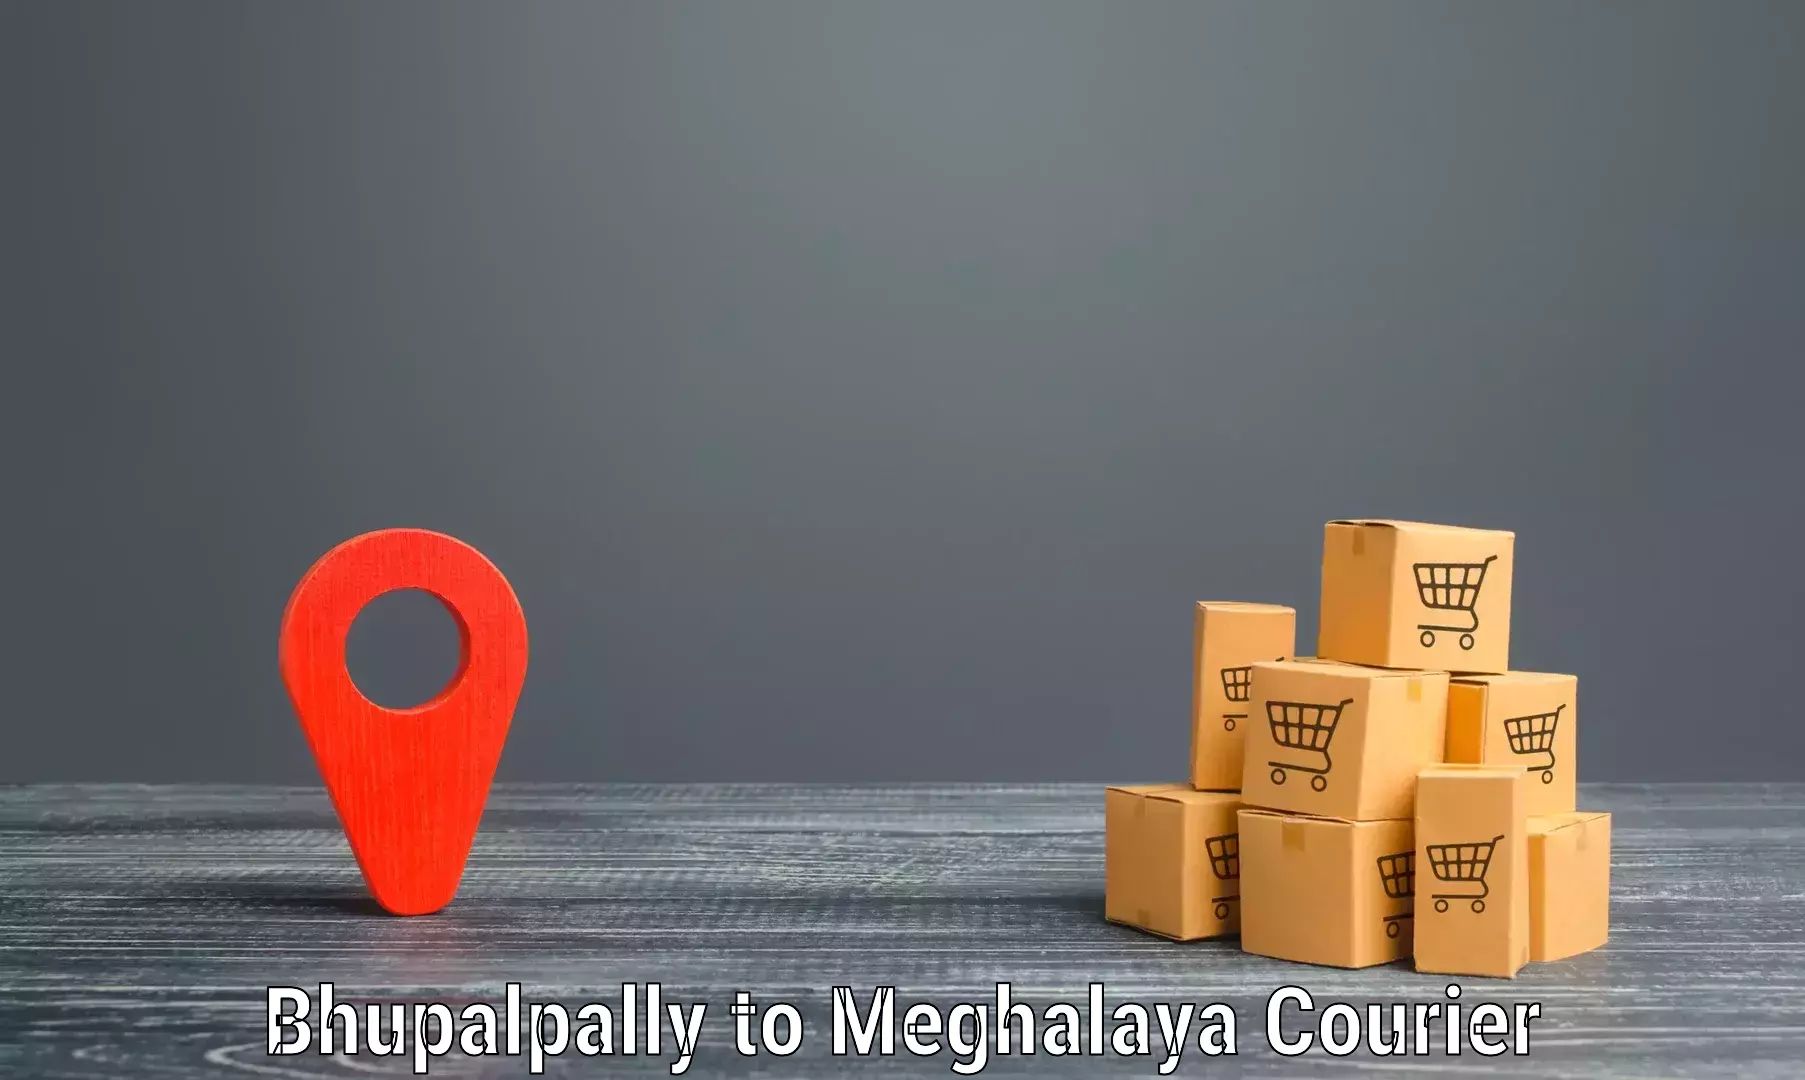 Lightweight parcel options Bhupalpally to Shillong